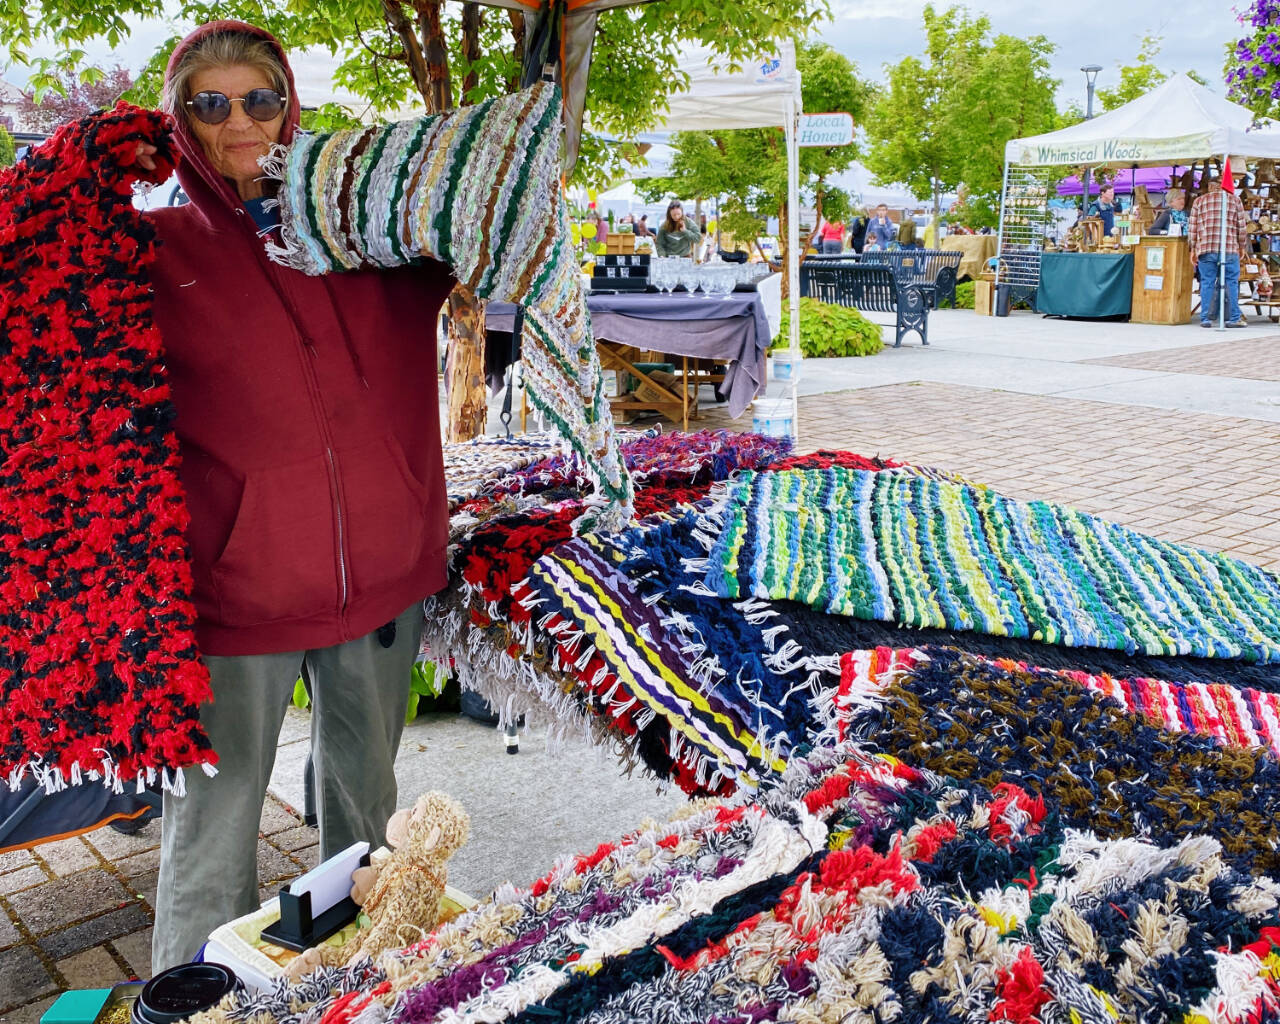 Emma Jane Garcia/Sequim Farmers & Artisans Market
Diane Frandsen of Raggedy Rug Company displays some of her colorful pieces at the Sequim Farmers & Artisans Market.